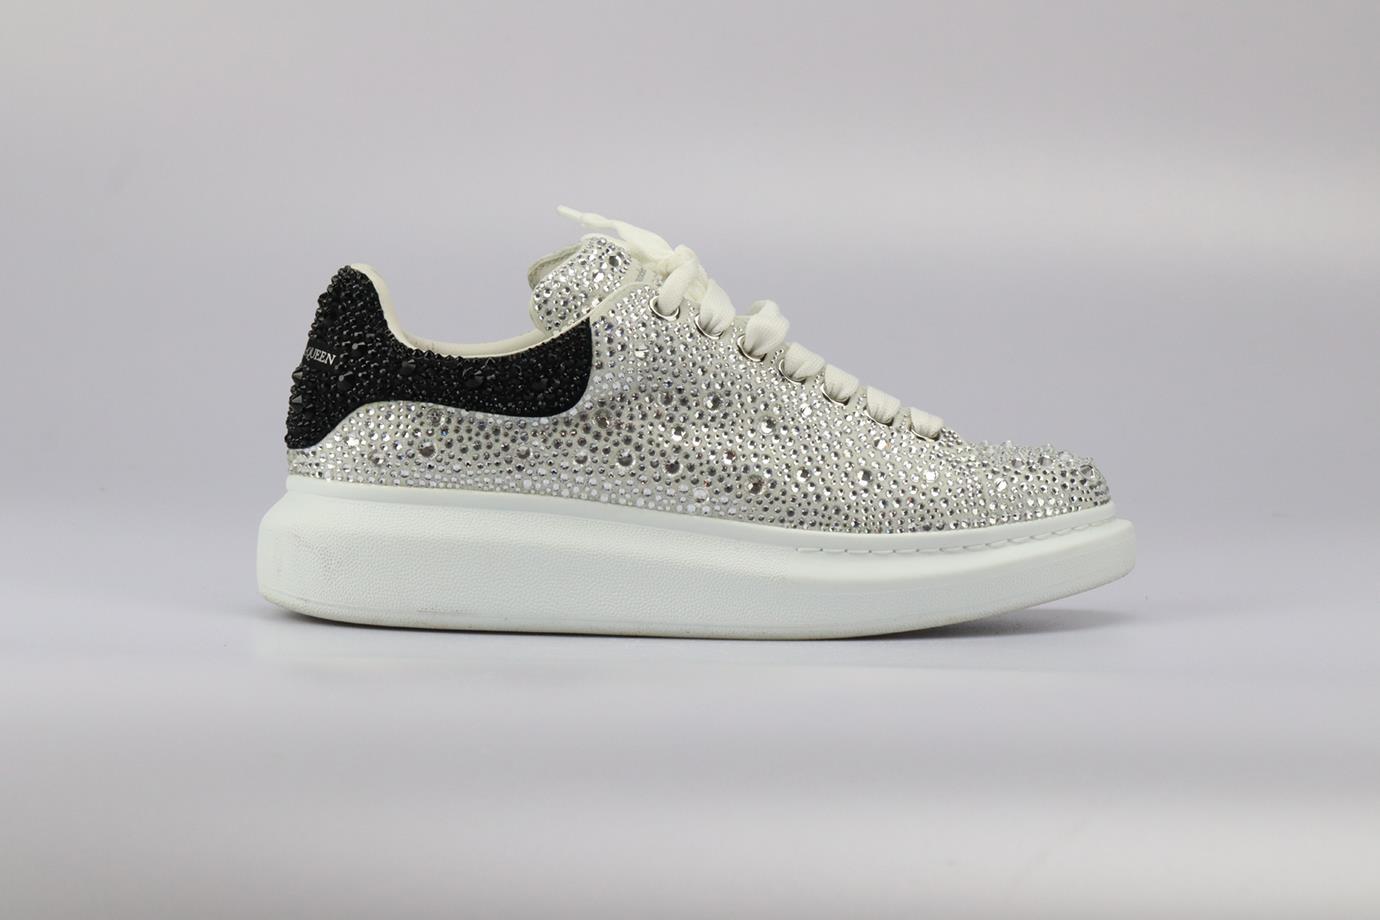 Alexander Mcqueen Crystal Embellished Suede Platform Sneakers. Silver, black and white. Lace up fastening - Front. Does not come with - dustbag or box. EU 40 (UK 7, US 10). Insole: 11.1 in. Heel height: 1.6 in. Platform: 1.6 in. Condition: Used.